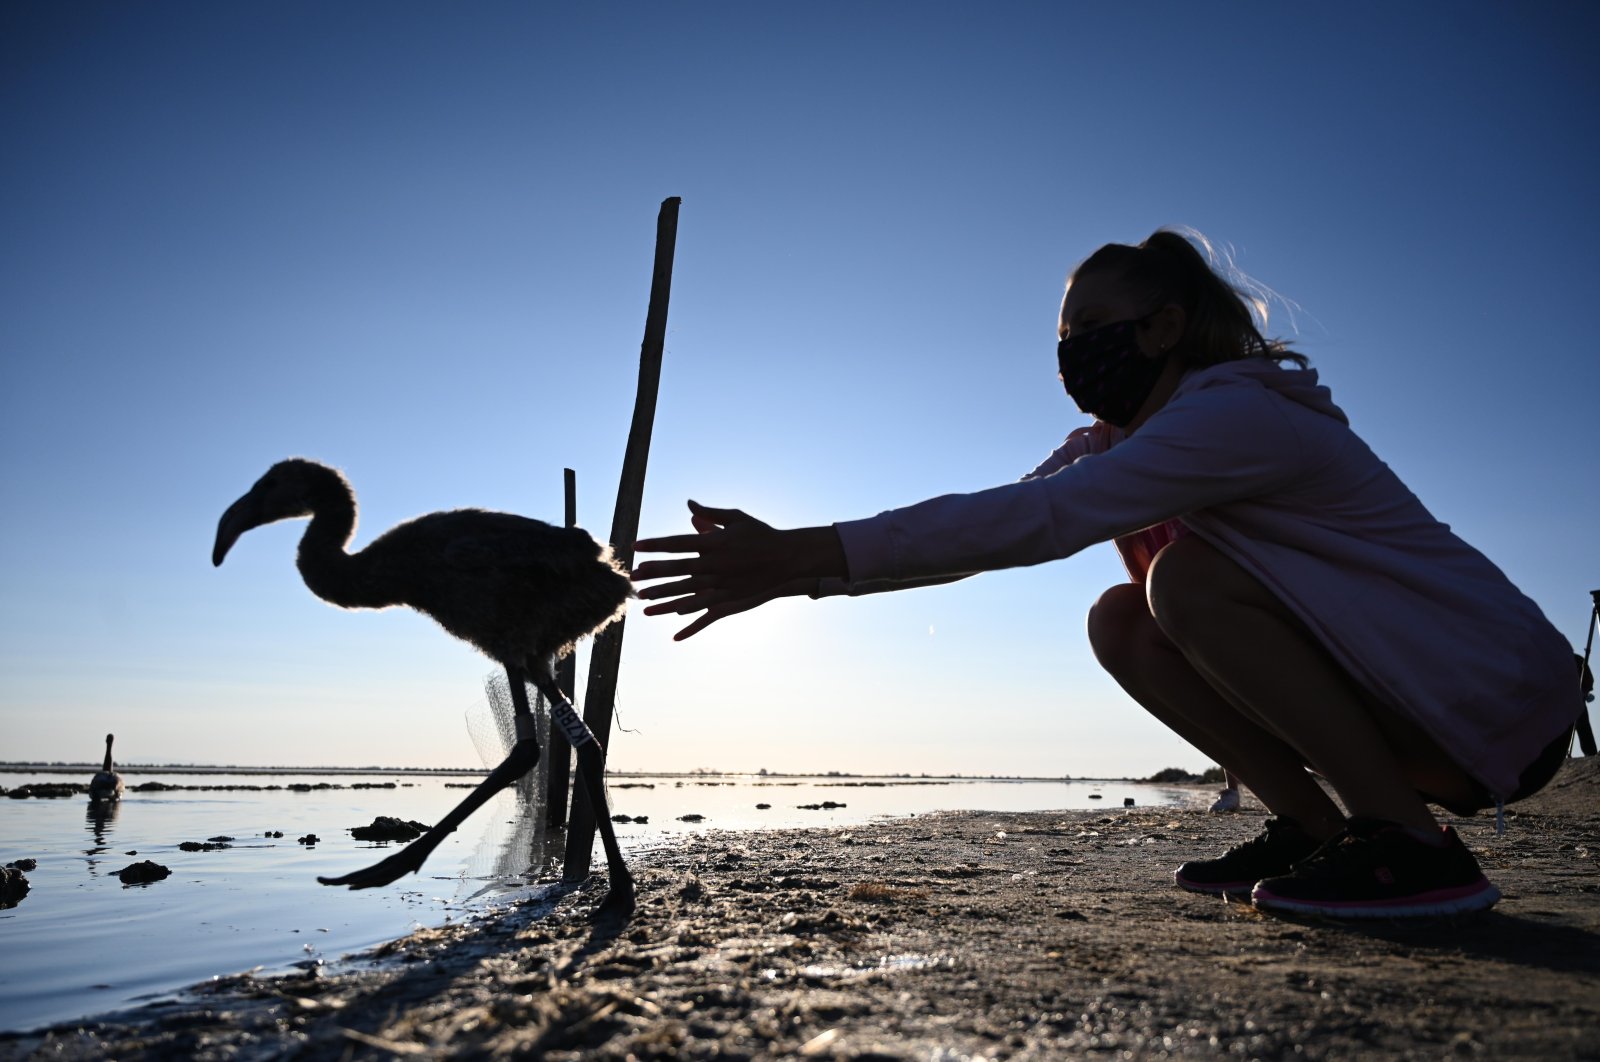 A volunteer releases a flamingo chick in Aigues-Mortes, near Montpellier, southern France, on Aug. 5, 2020. (AFP Photo)